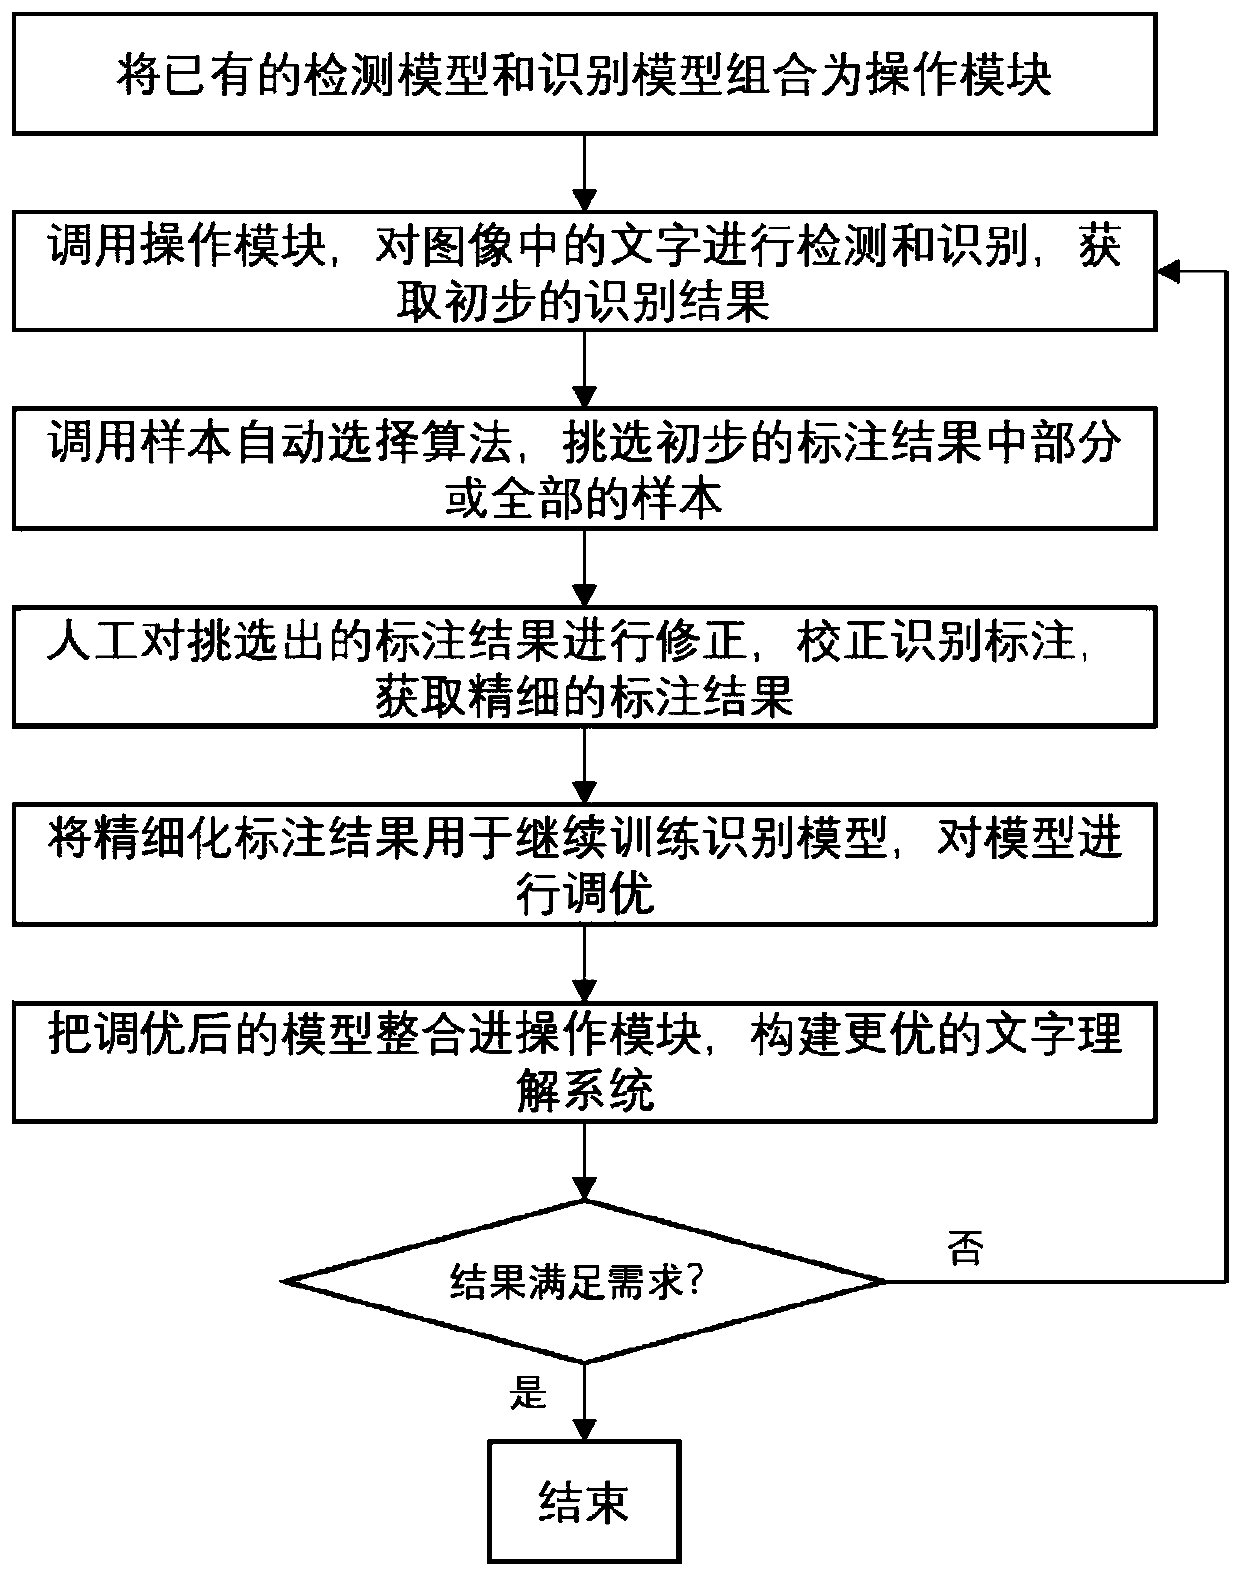 Image character recognition system and method